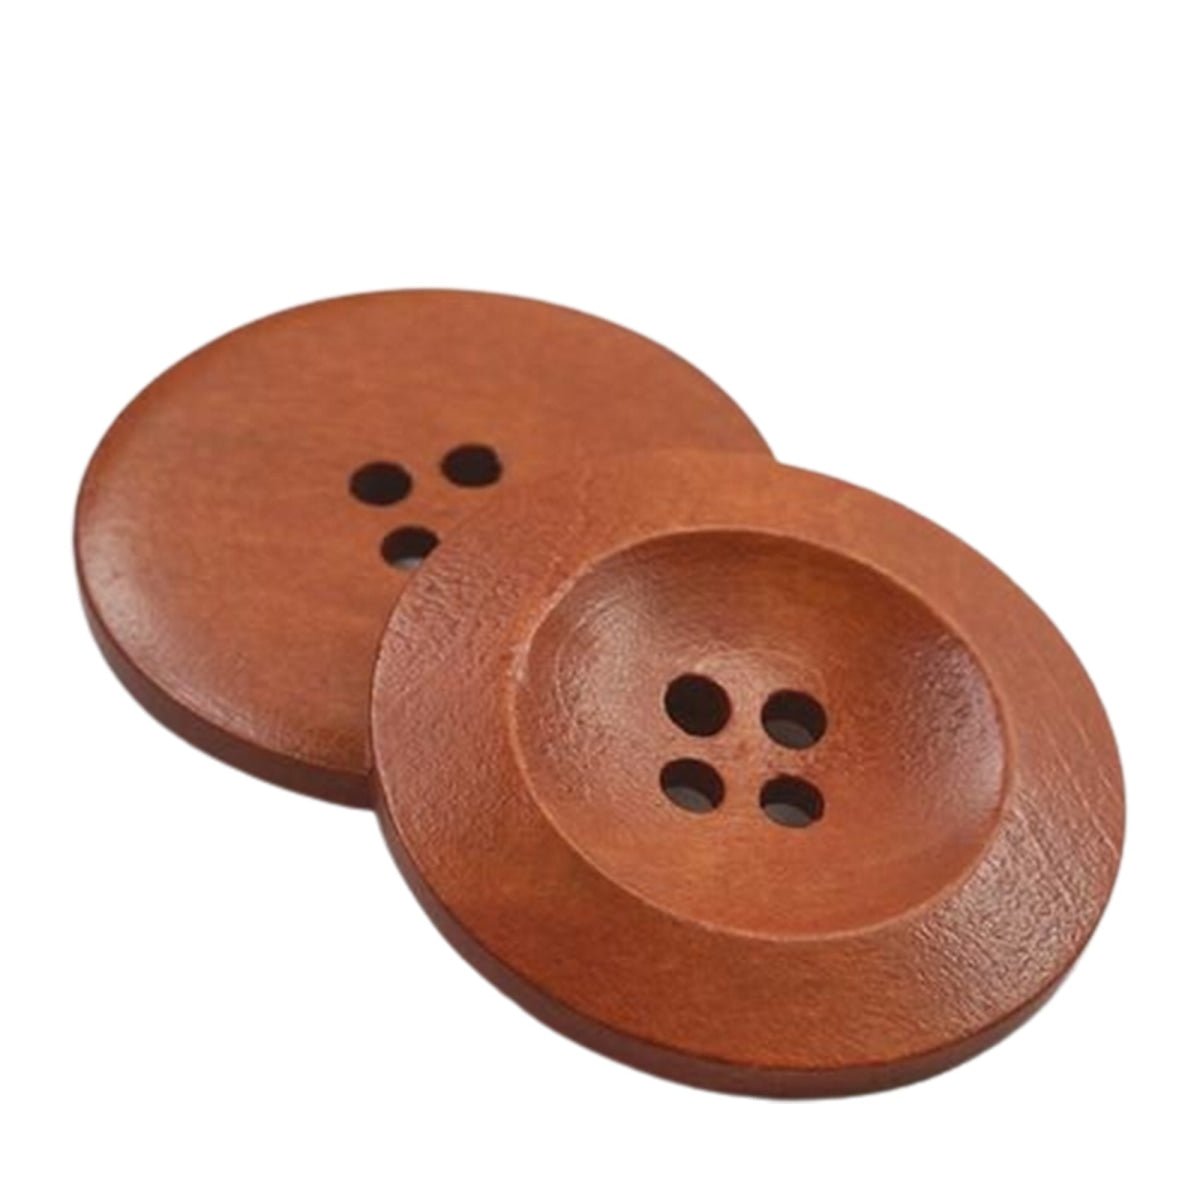 50pcs 15mm 20mm 25mm 30mm 35mm 4 Hole Wooden Buttons Sewing Round Wood Button For Clothes Coat Handmade - 20mm Light Coffee - - Asia Sell